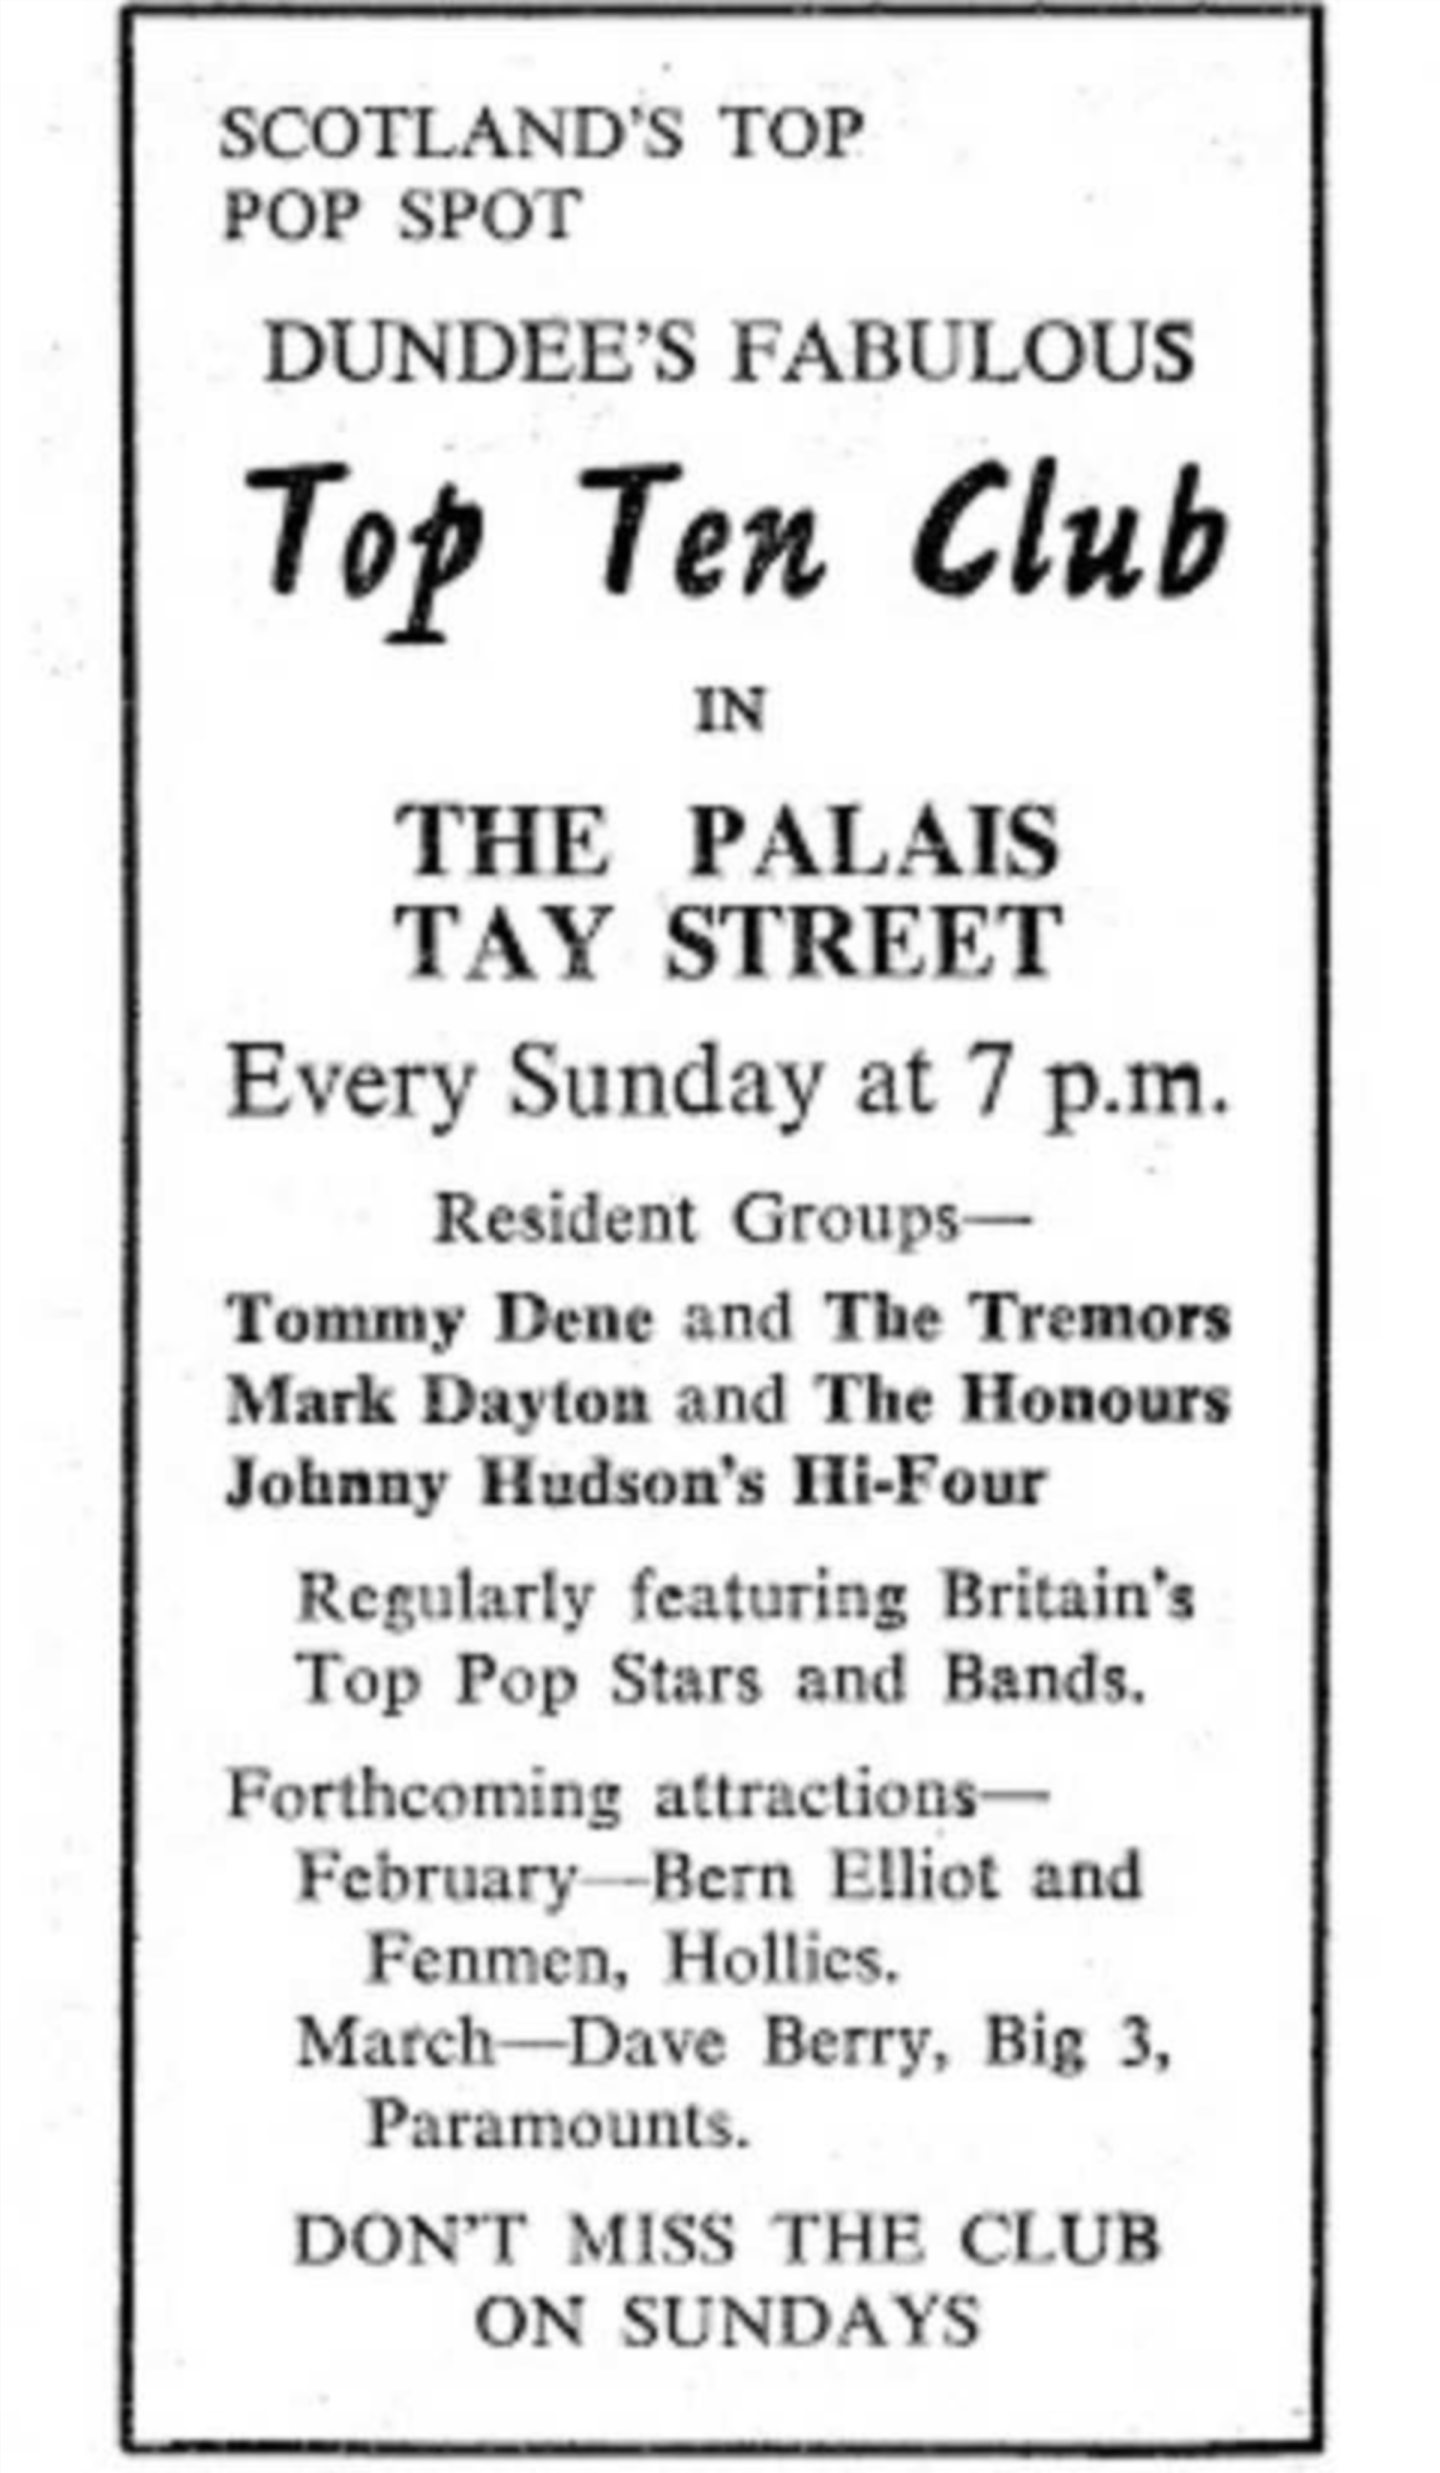 A poster for the Top Ten Club